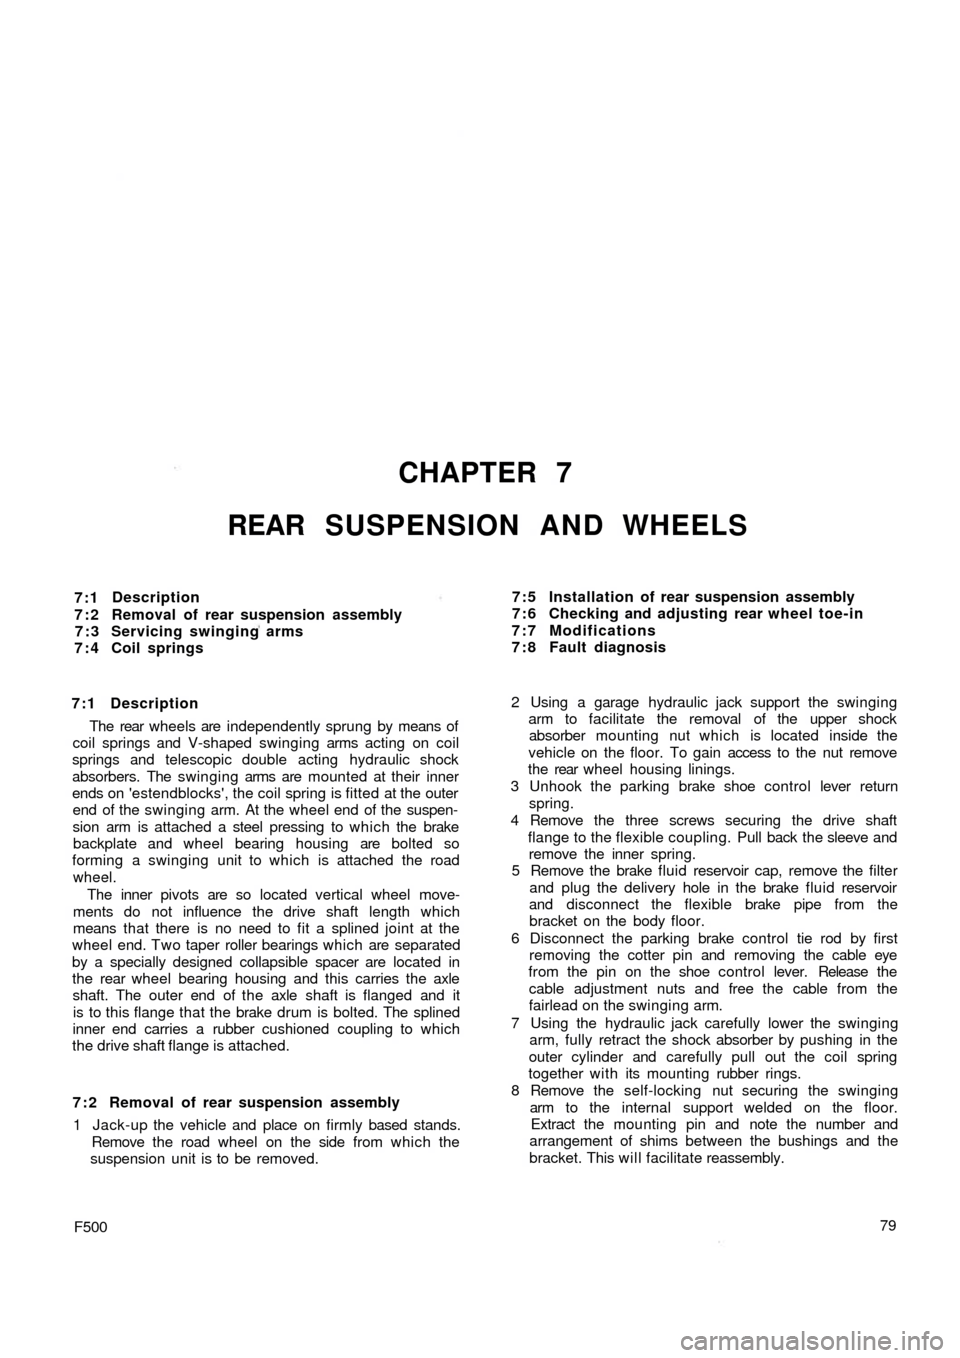 FIAT 500 1965 1.G Workshop Manual CHAPTER 7
REAR SUSPENSION AND WHEELS
7:1
7:2
7:3
7:4Description
Removal of rear suspension assembly
Servicing swinging arms
Coil springs
7:1 Description
The  rear  wheels are independently sprung by m